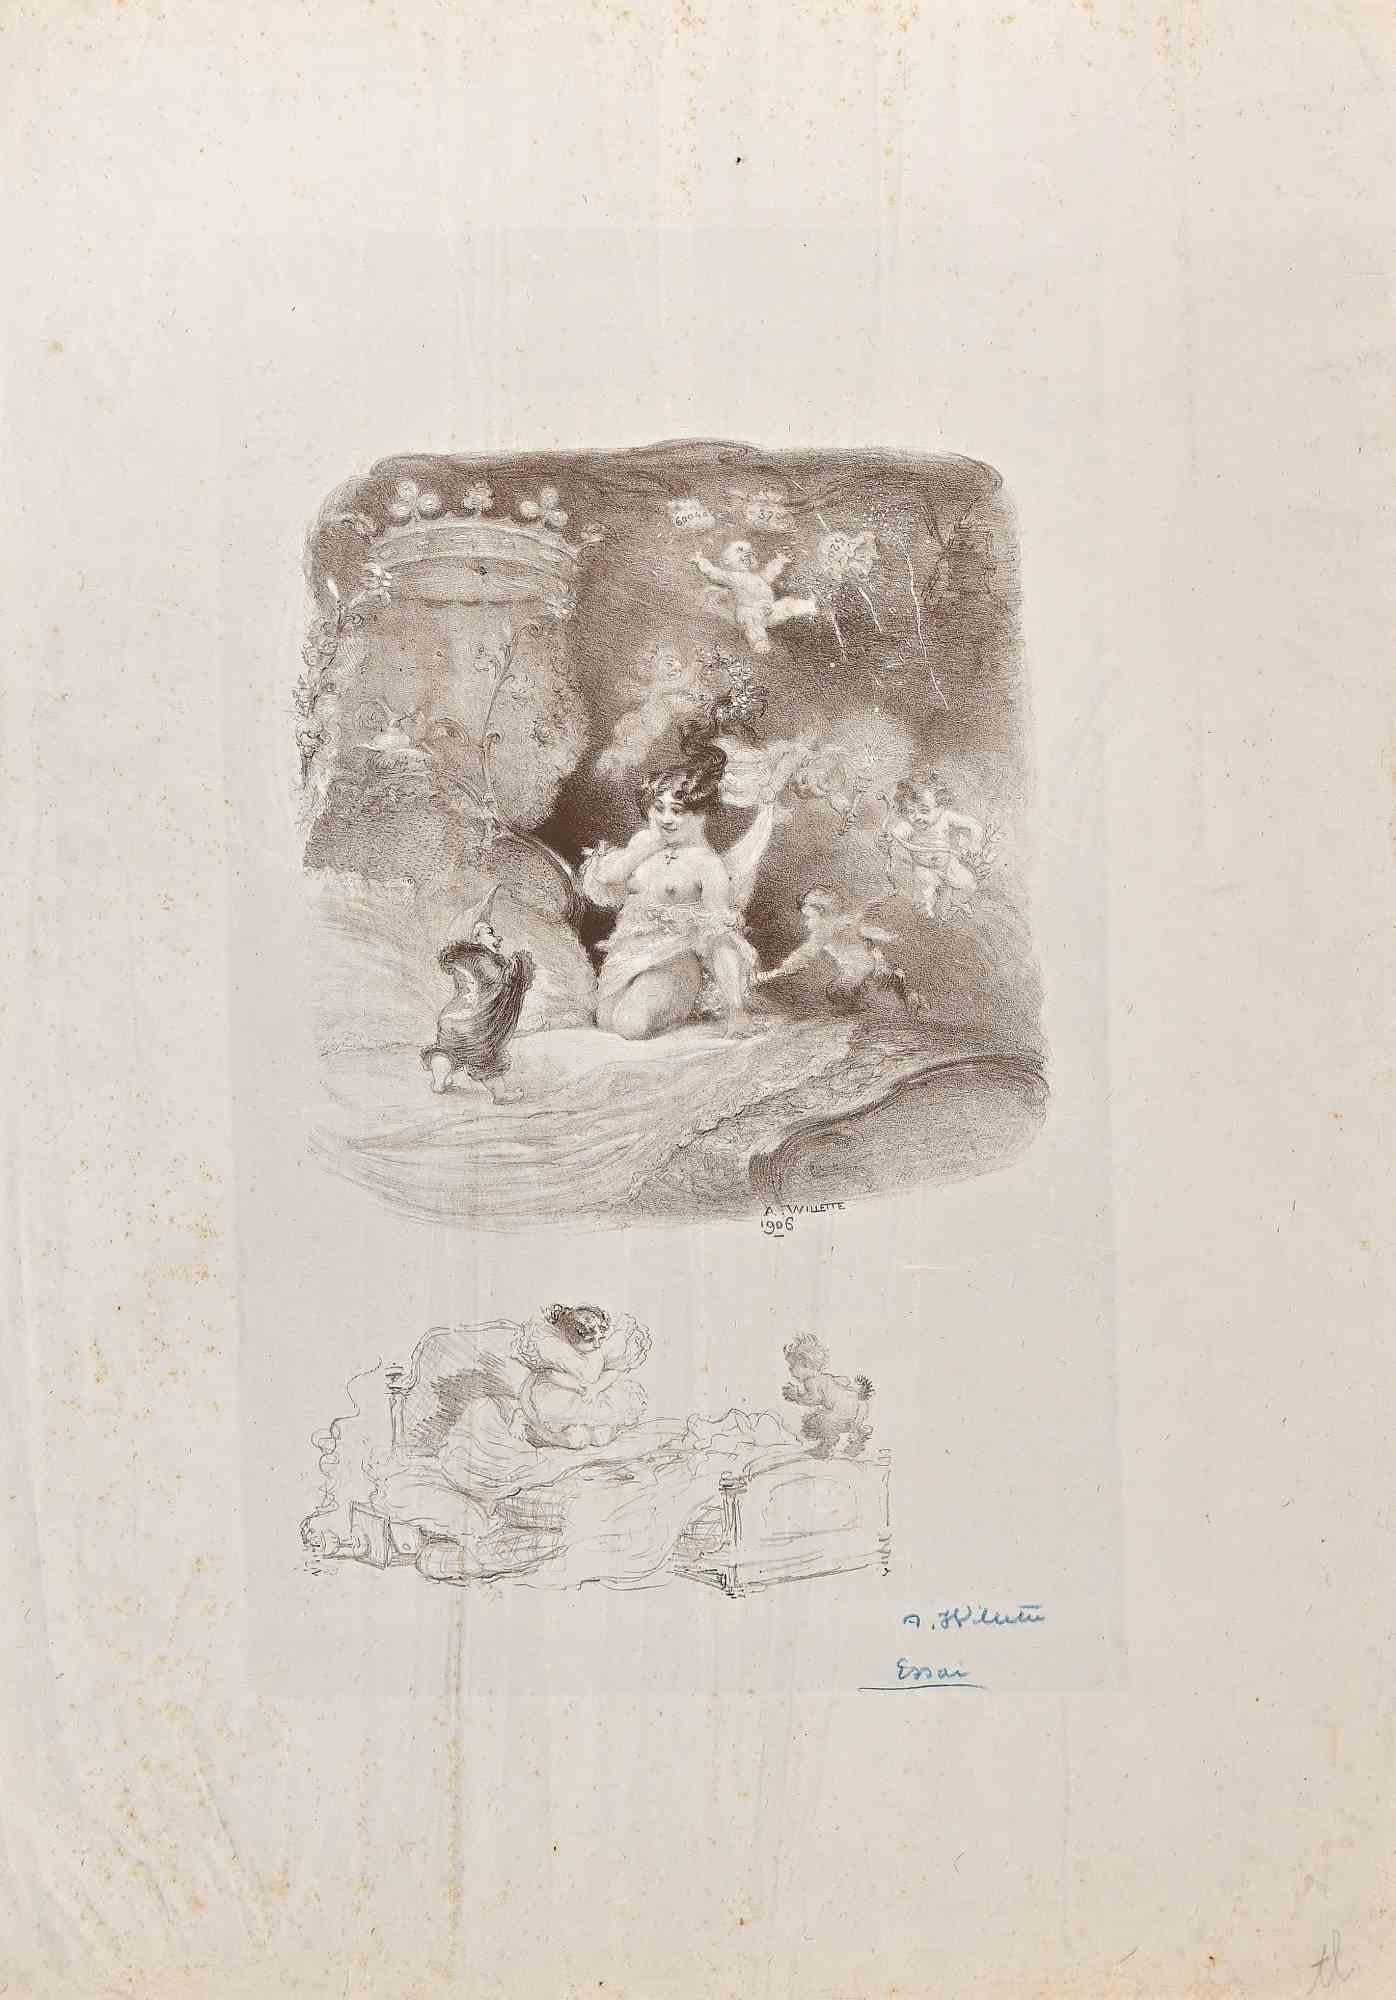 Lady with Cupids and Dwarf is a Lithograph realized in 1906 by Willette (Adolphe Léon).

Hand-signed with pencil on the lower right corner.

Good condition with folding and consumed margins.

Adolphe Léon Willette (30 July 1857, Châlons-sur-Marne –